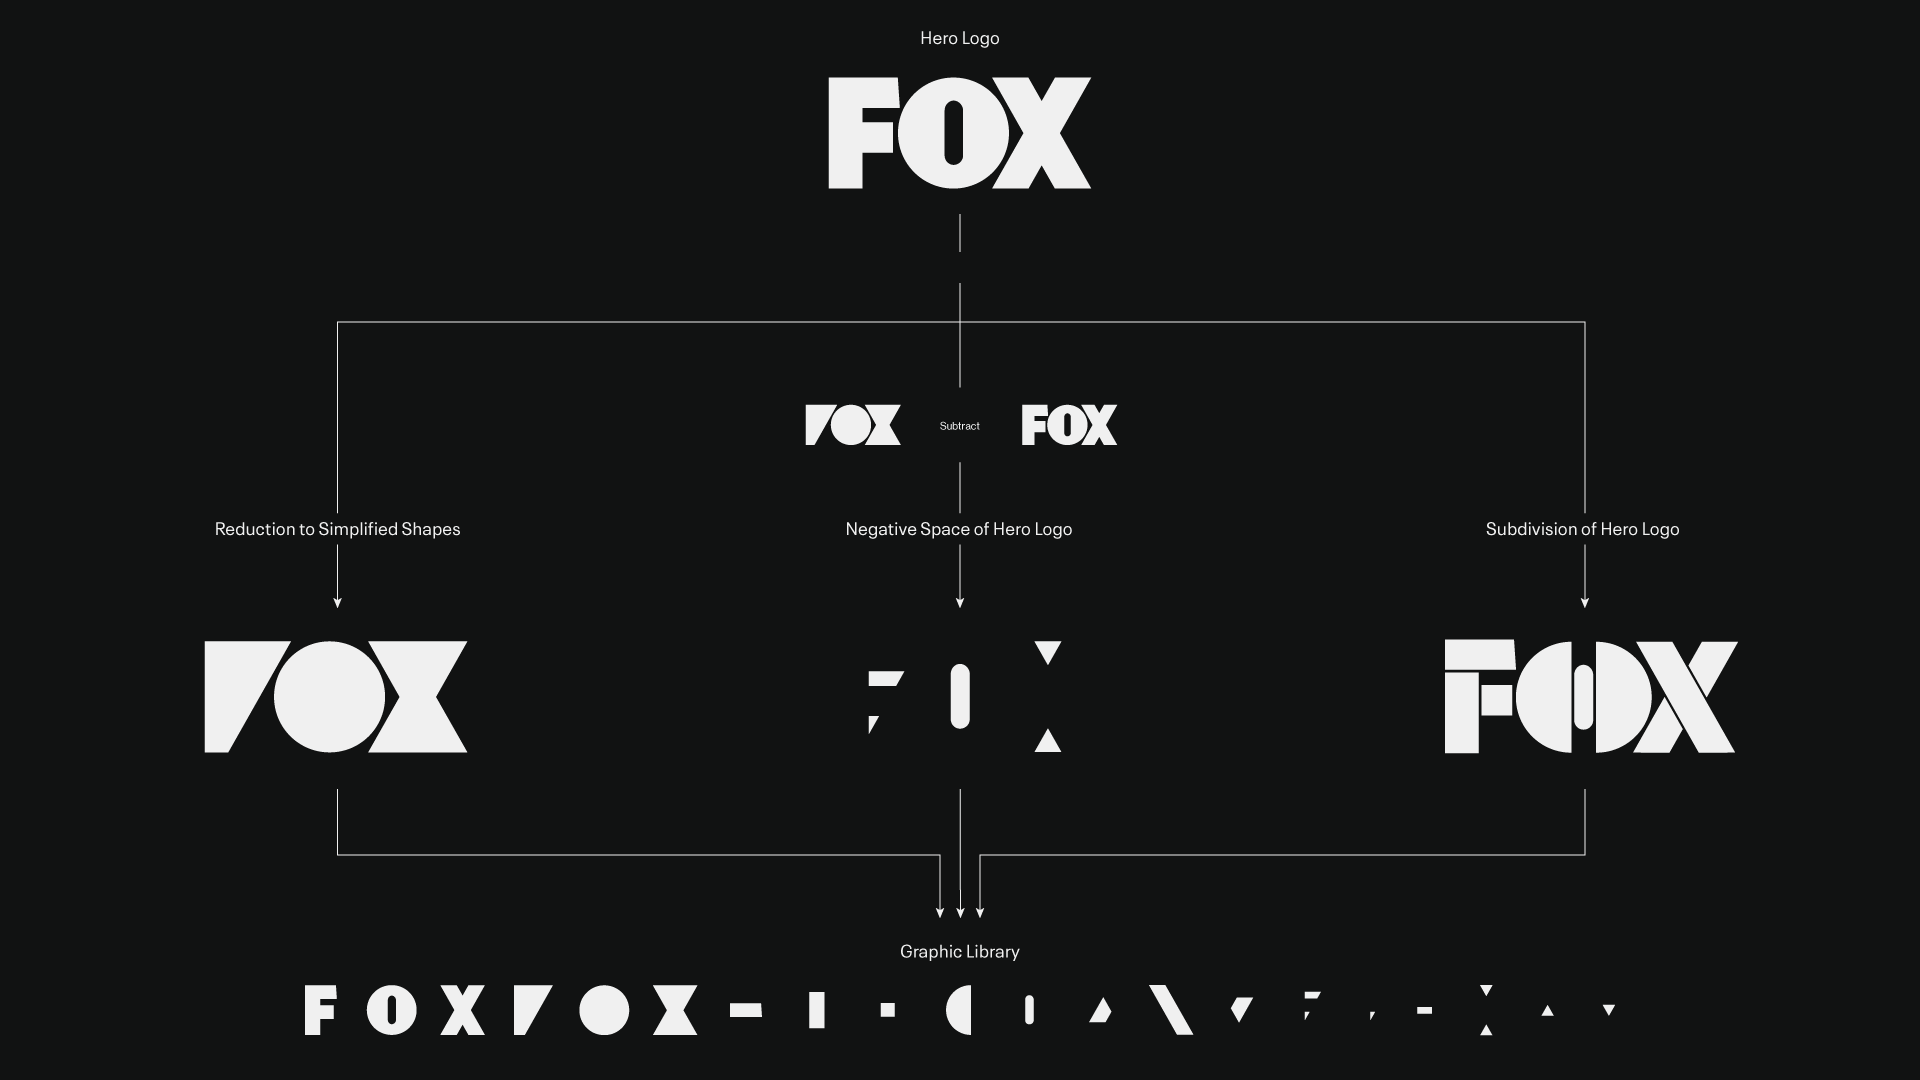 FOX_Graphic-Library-Elements_